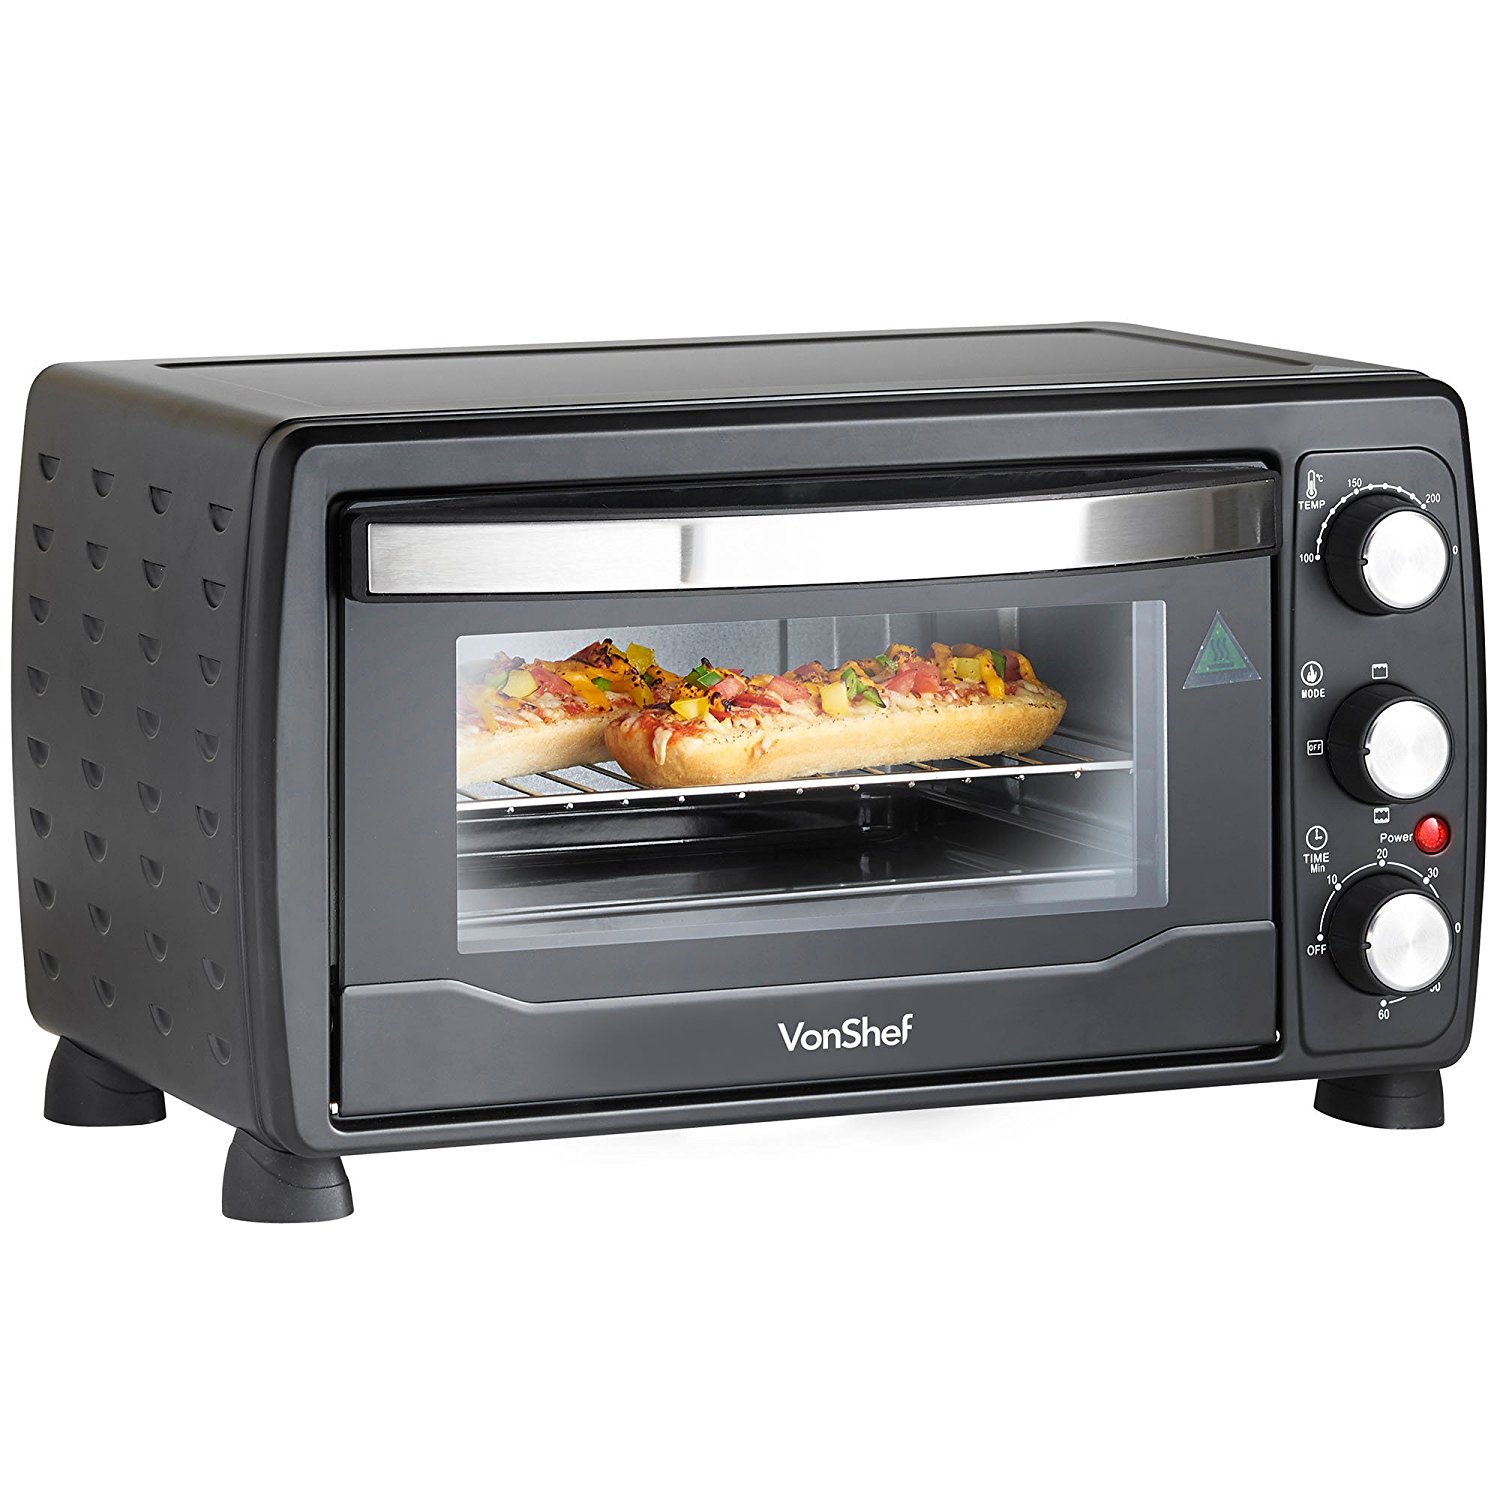 VonShef 19L Black Mini Oven /& Grill 1400W with Baking Tray /& Wire Rack